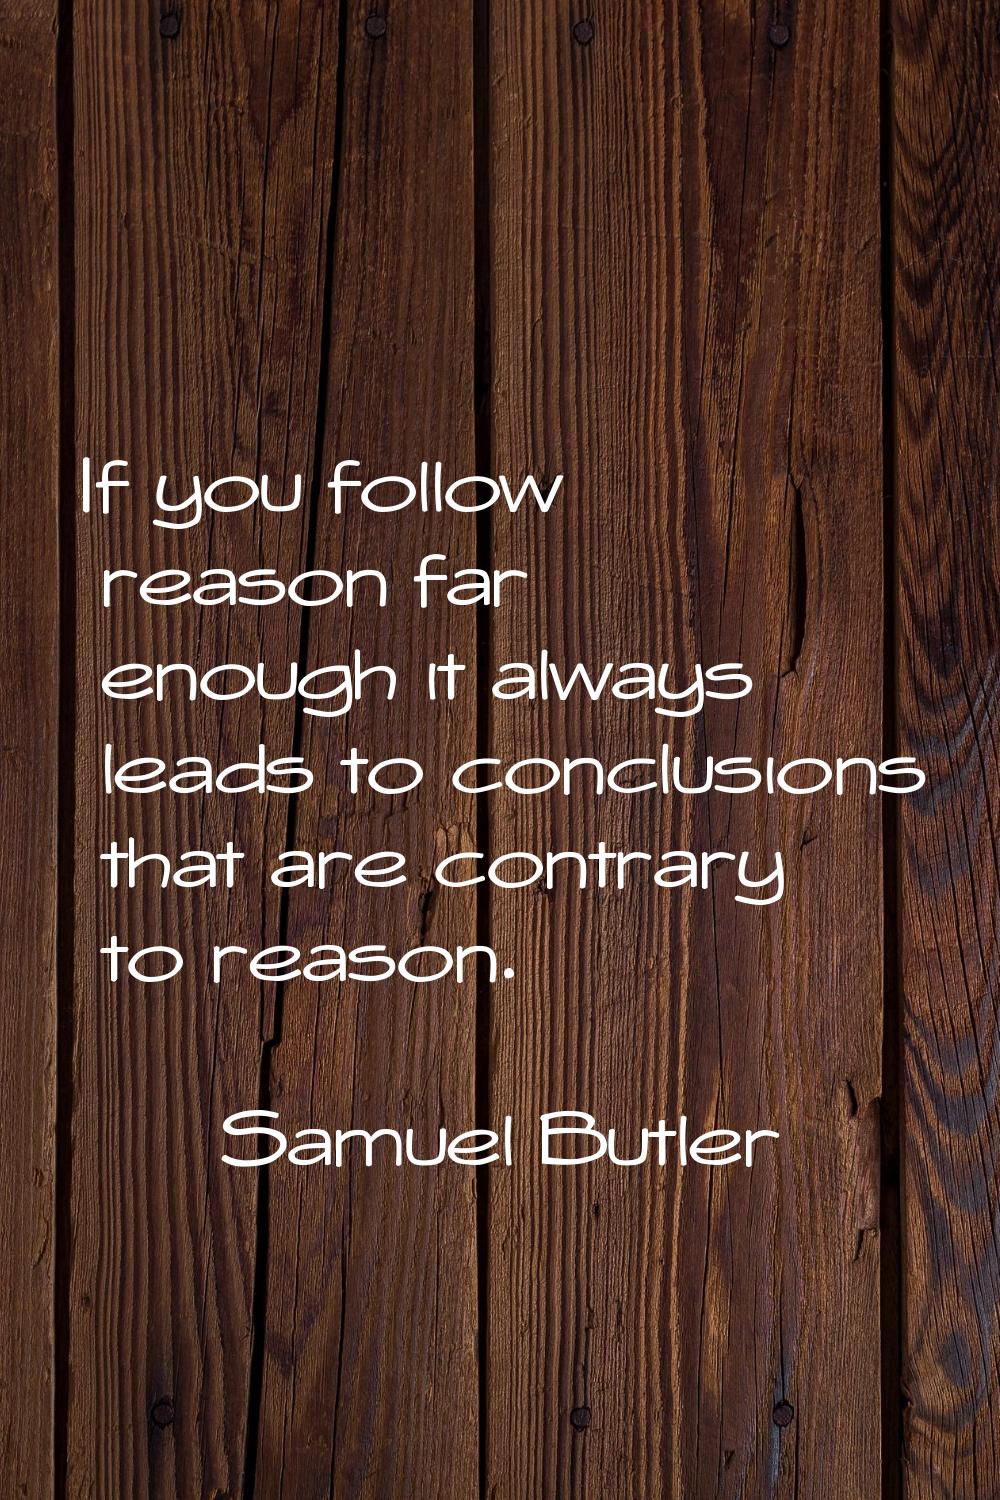 If you follow reason far enough it always leads to conclusions that are contrary to reason.